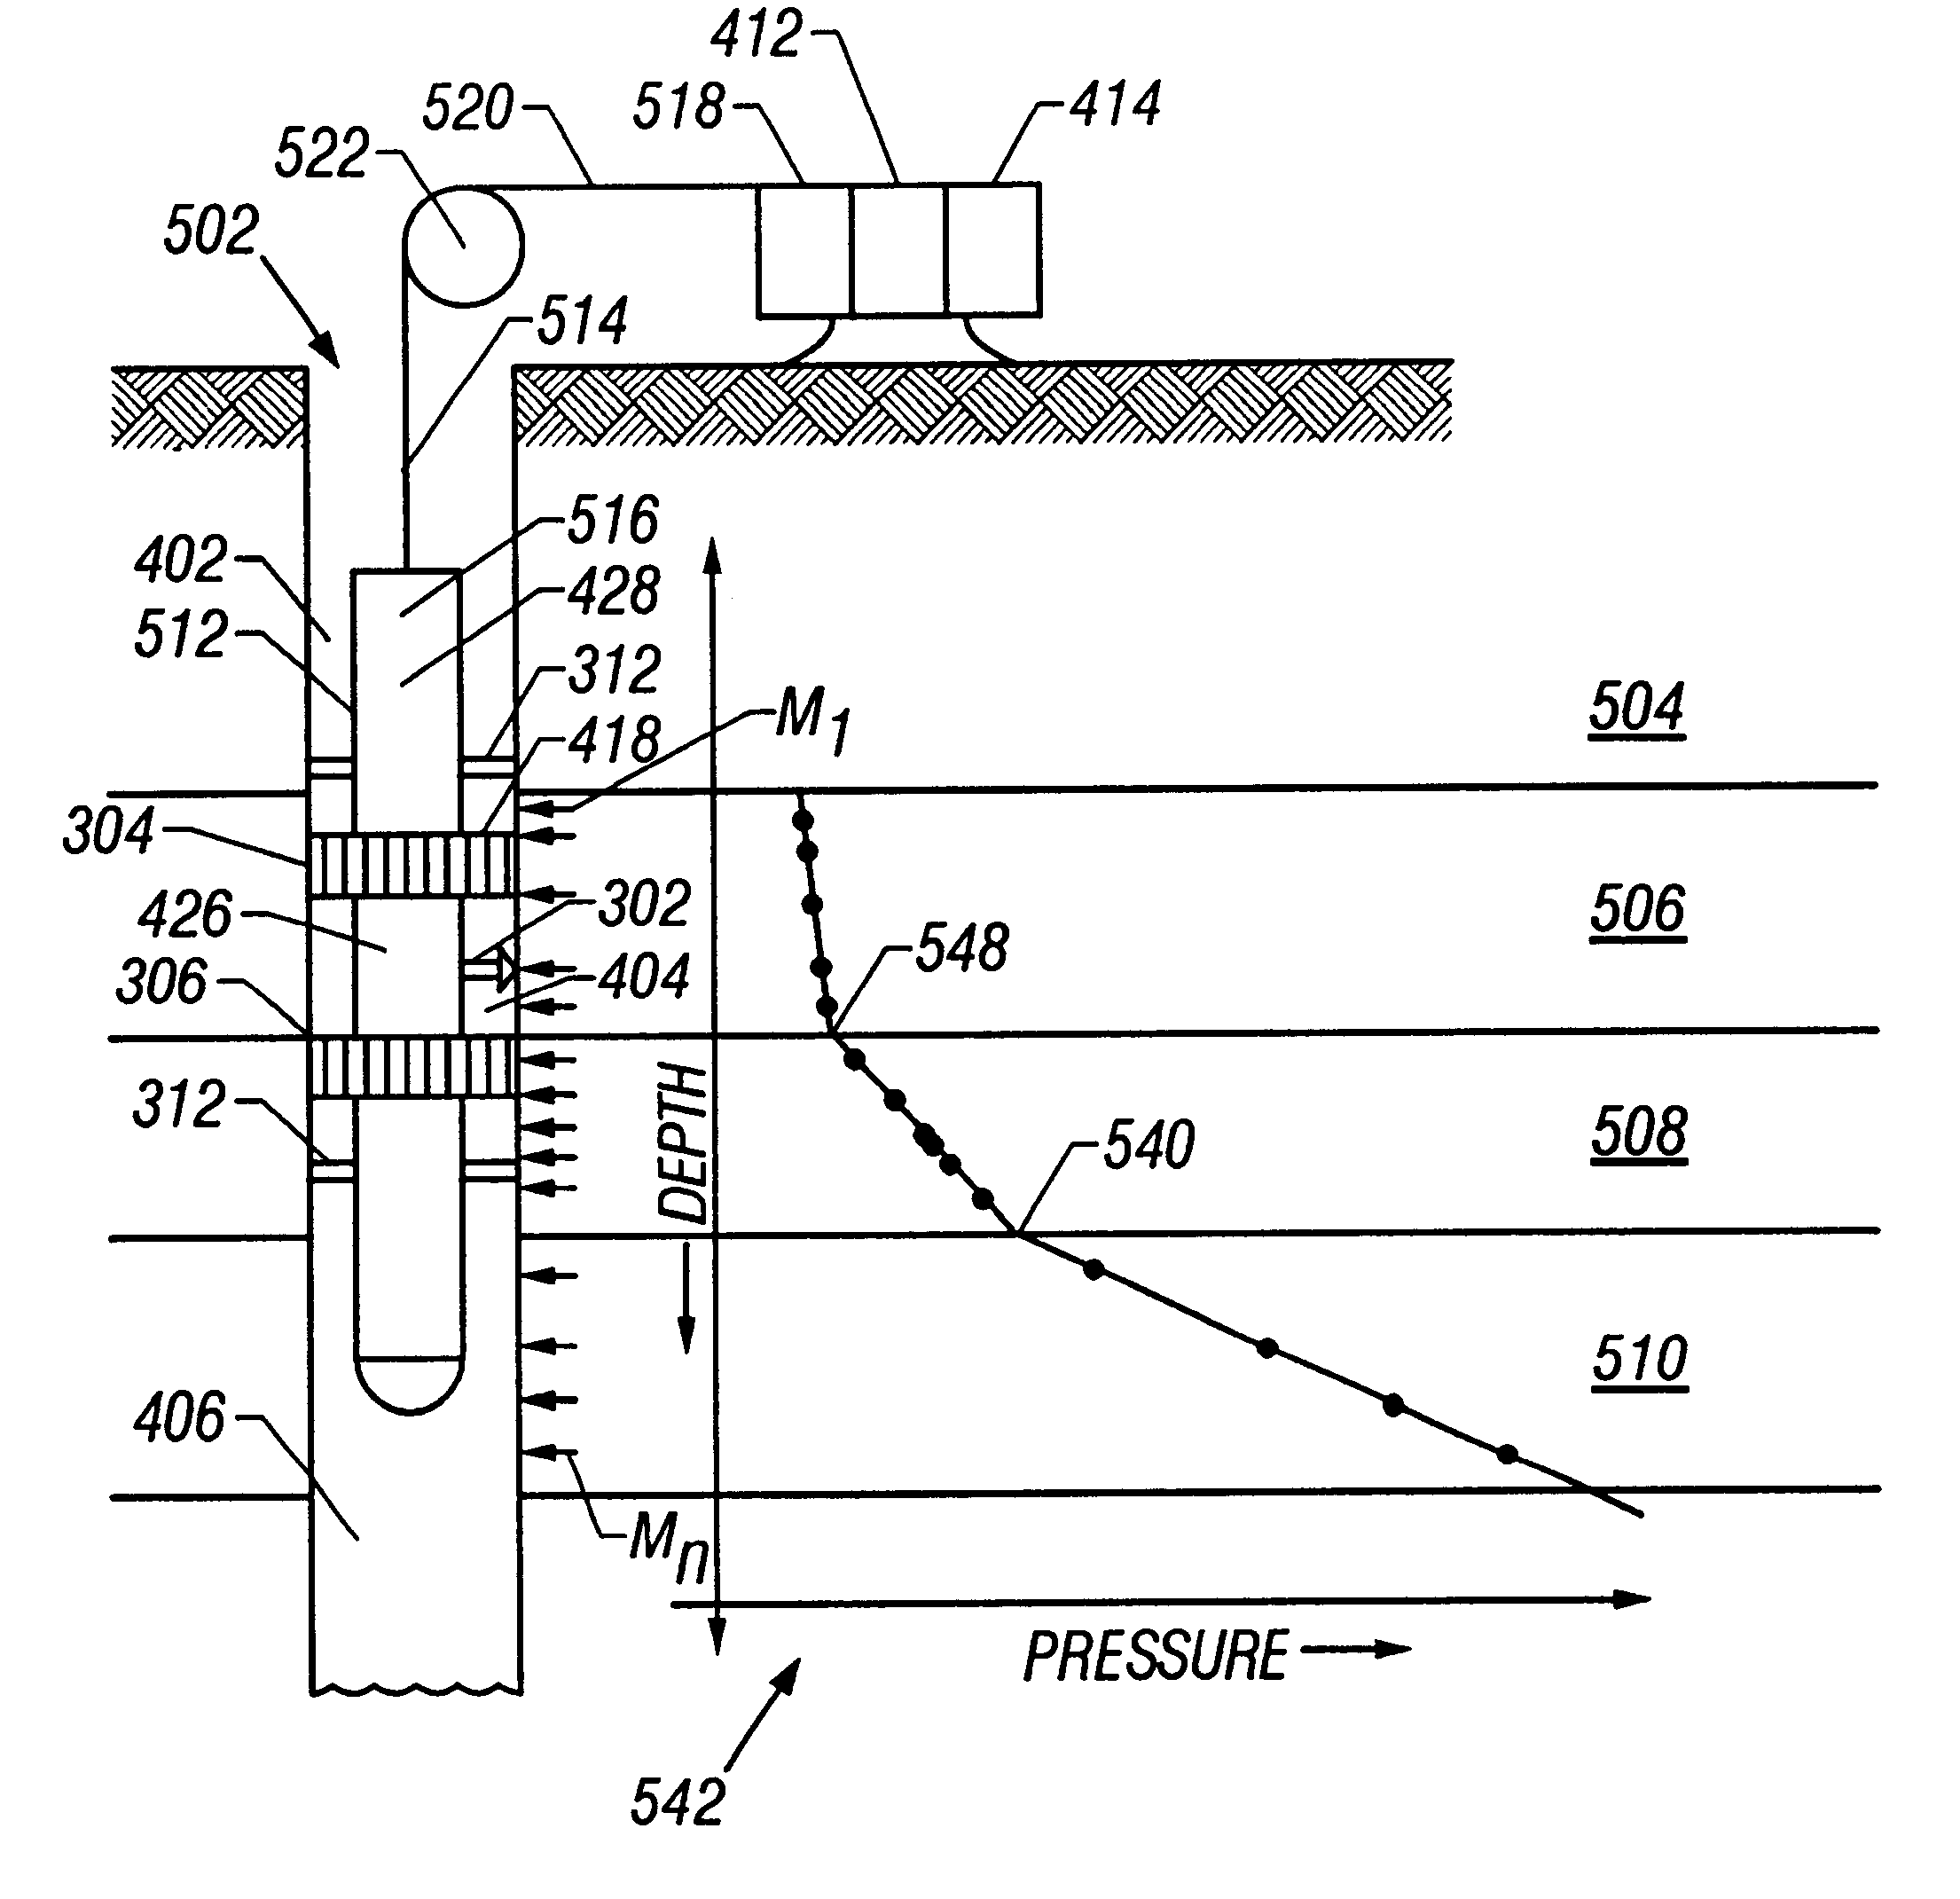 Method for in-situ analysis of formation parameters